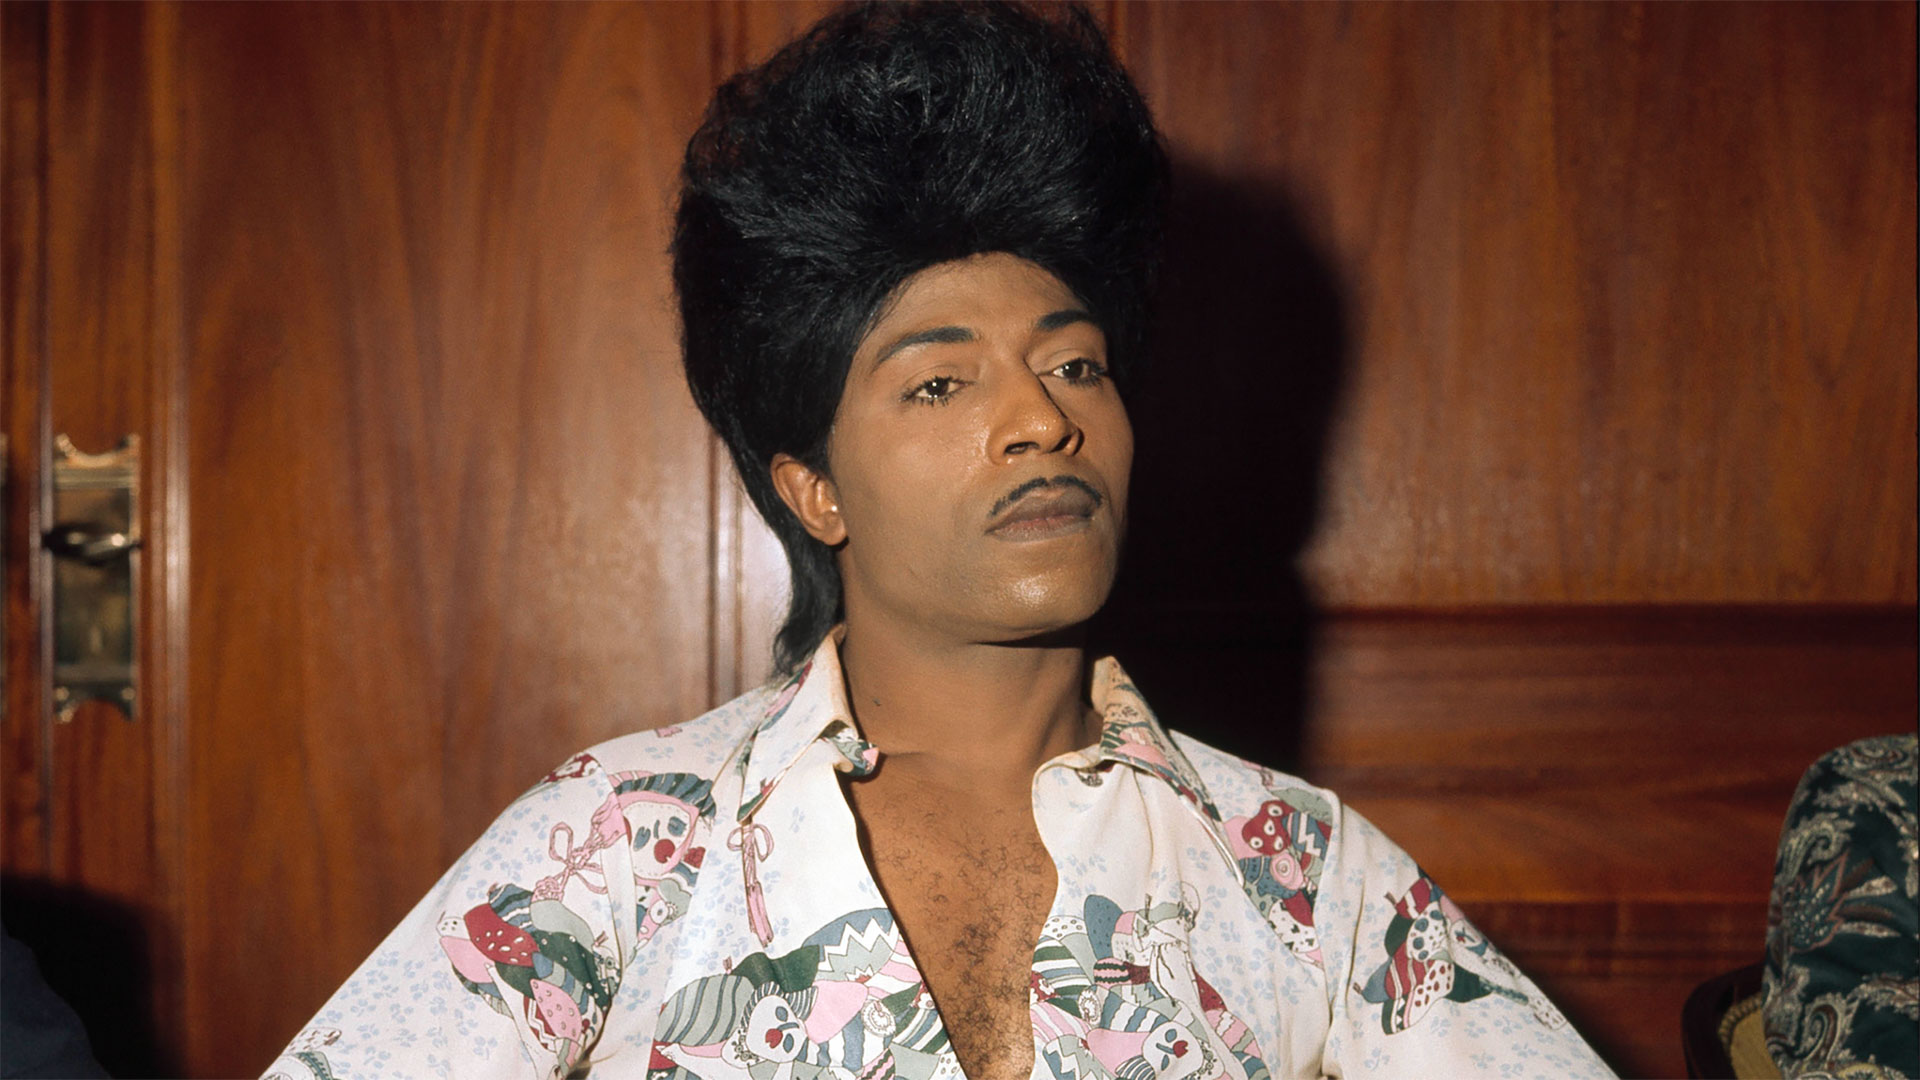 Little Richard promo photo is pictured